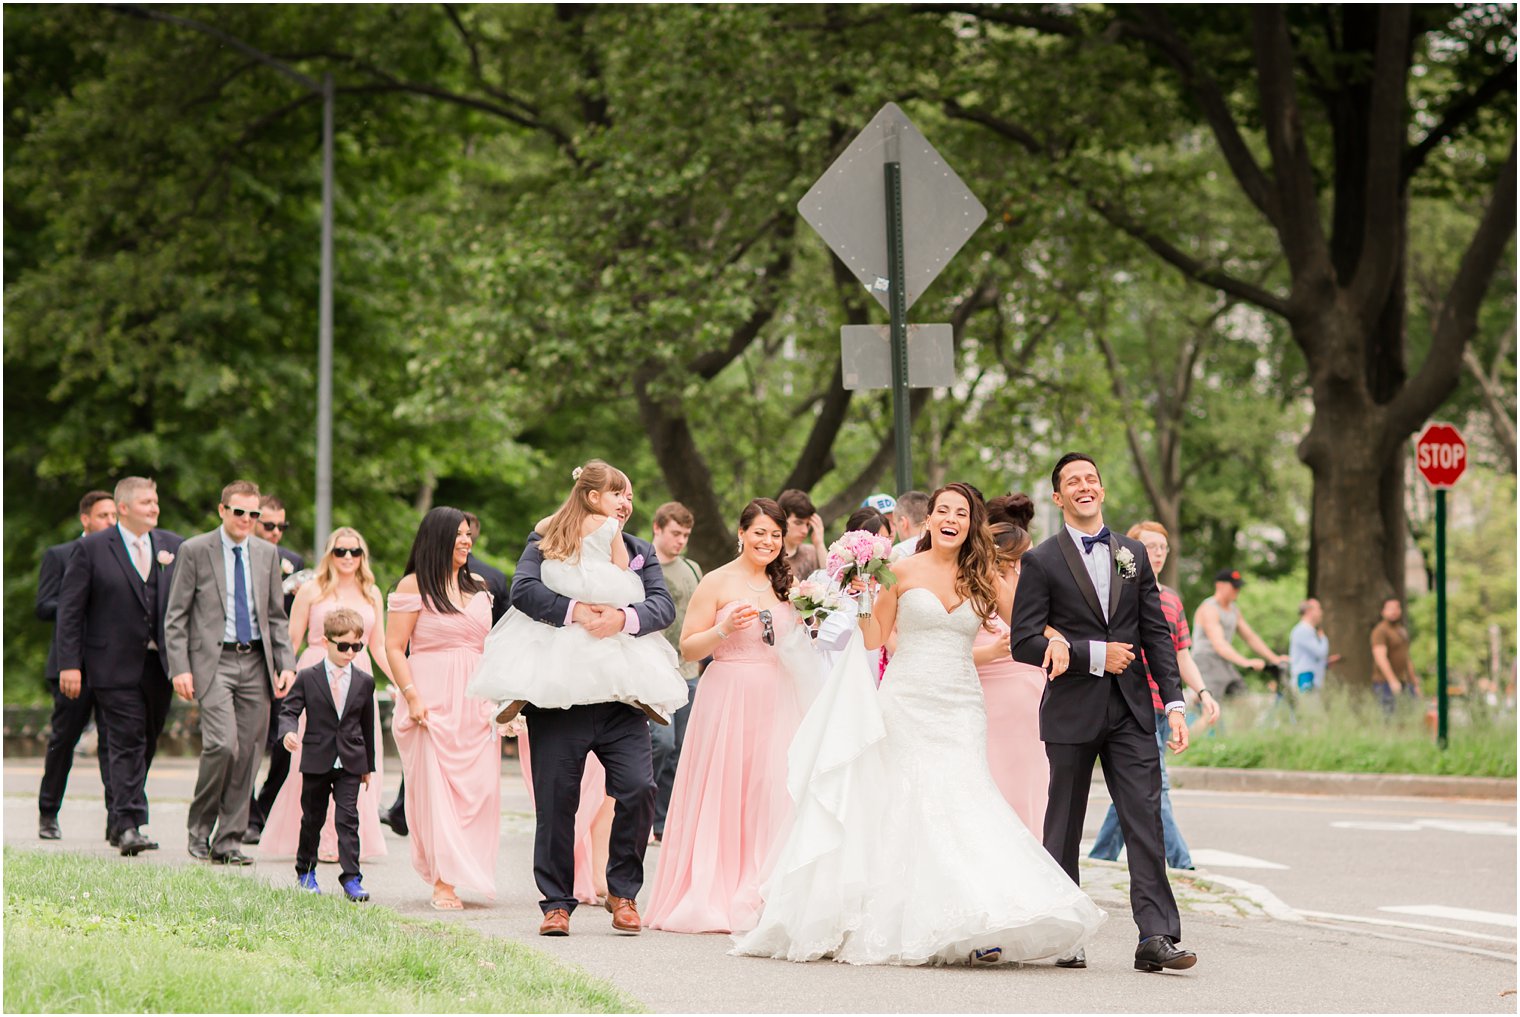 Bride and groom entering Central Park | Photo by Idalia Photography